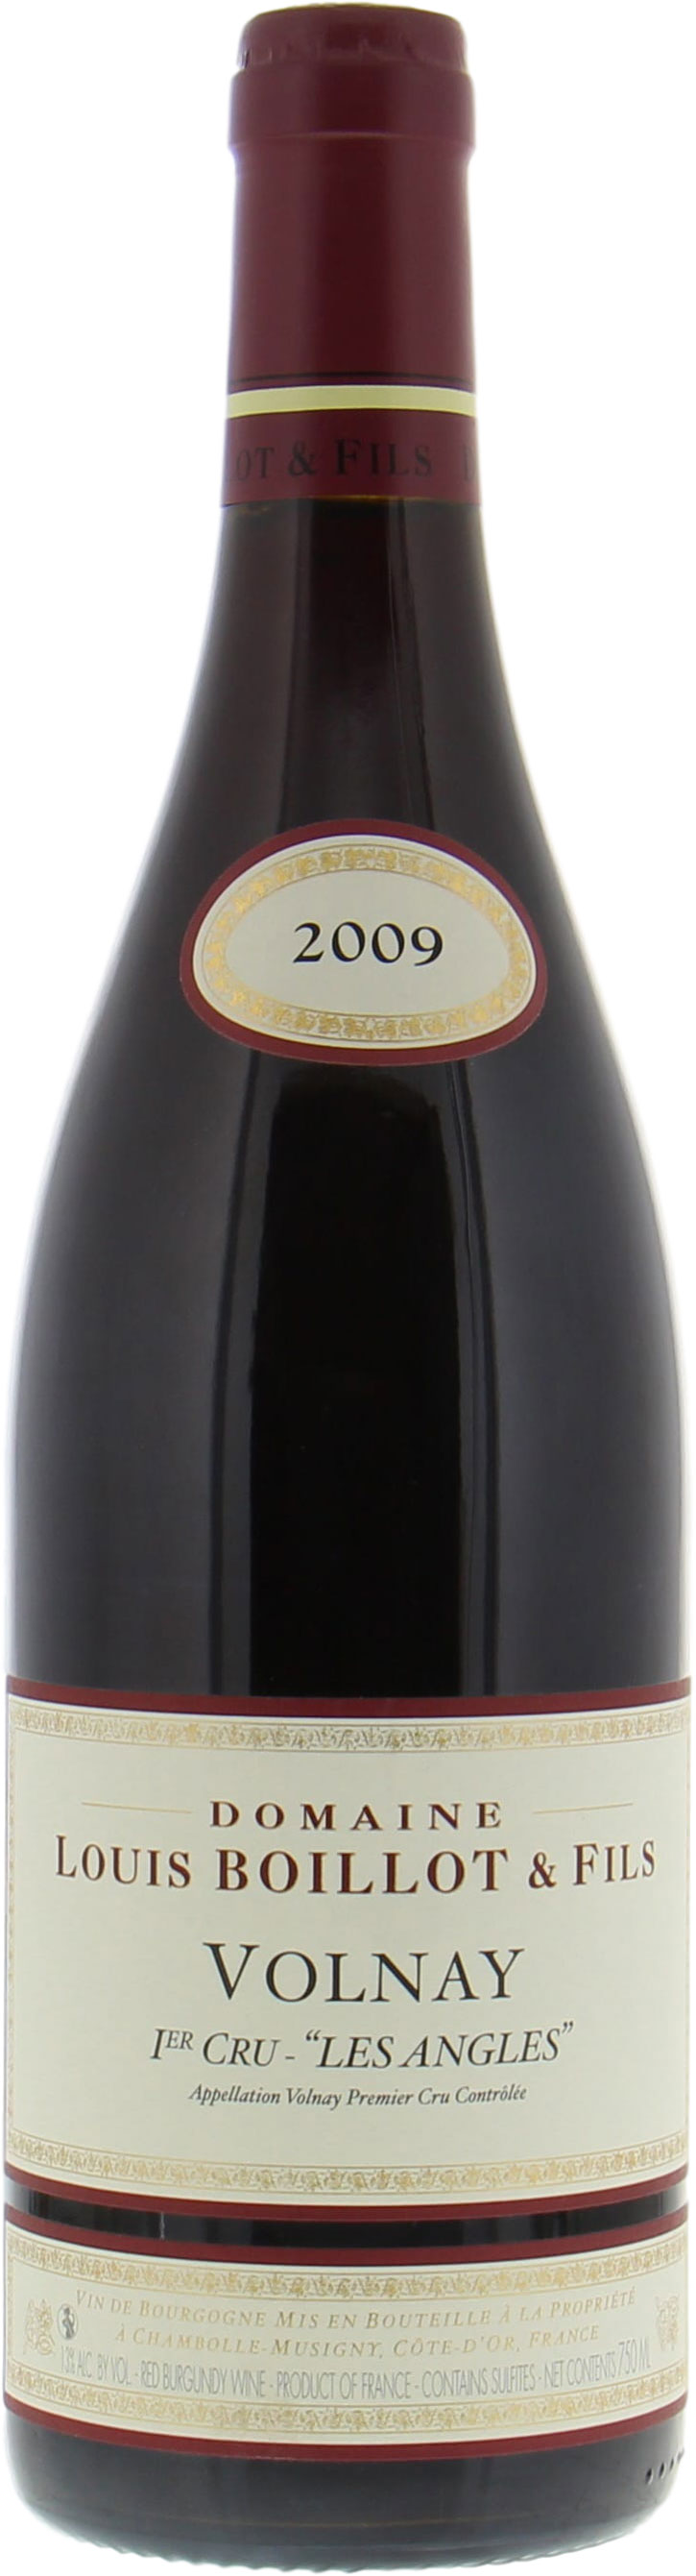 Domaine Louis Boillot - Volnay 1Er Cru les Angles 2009